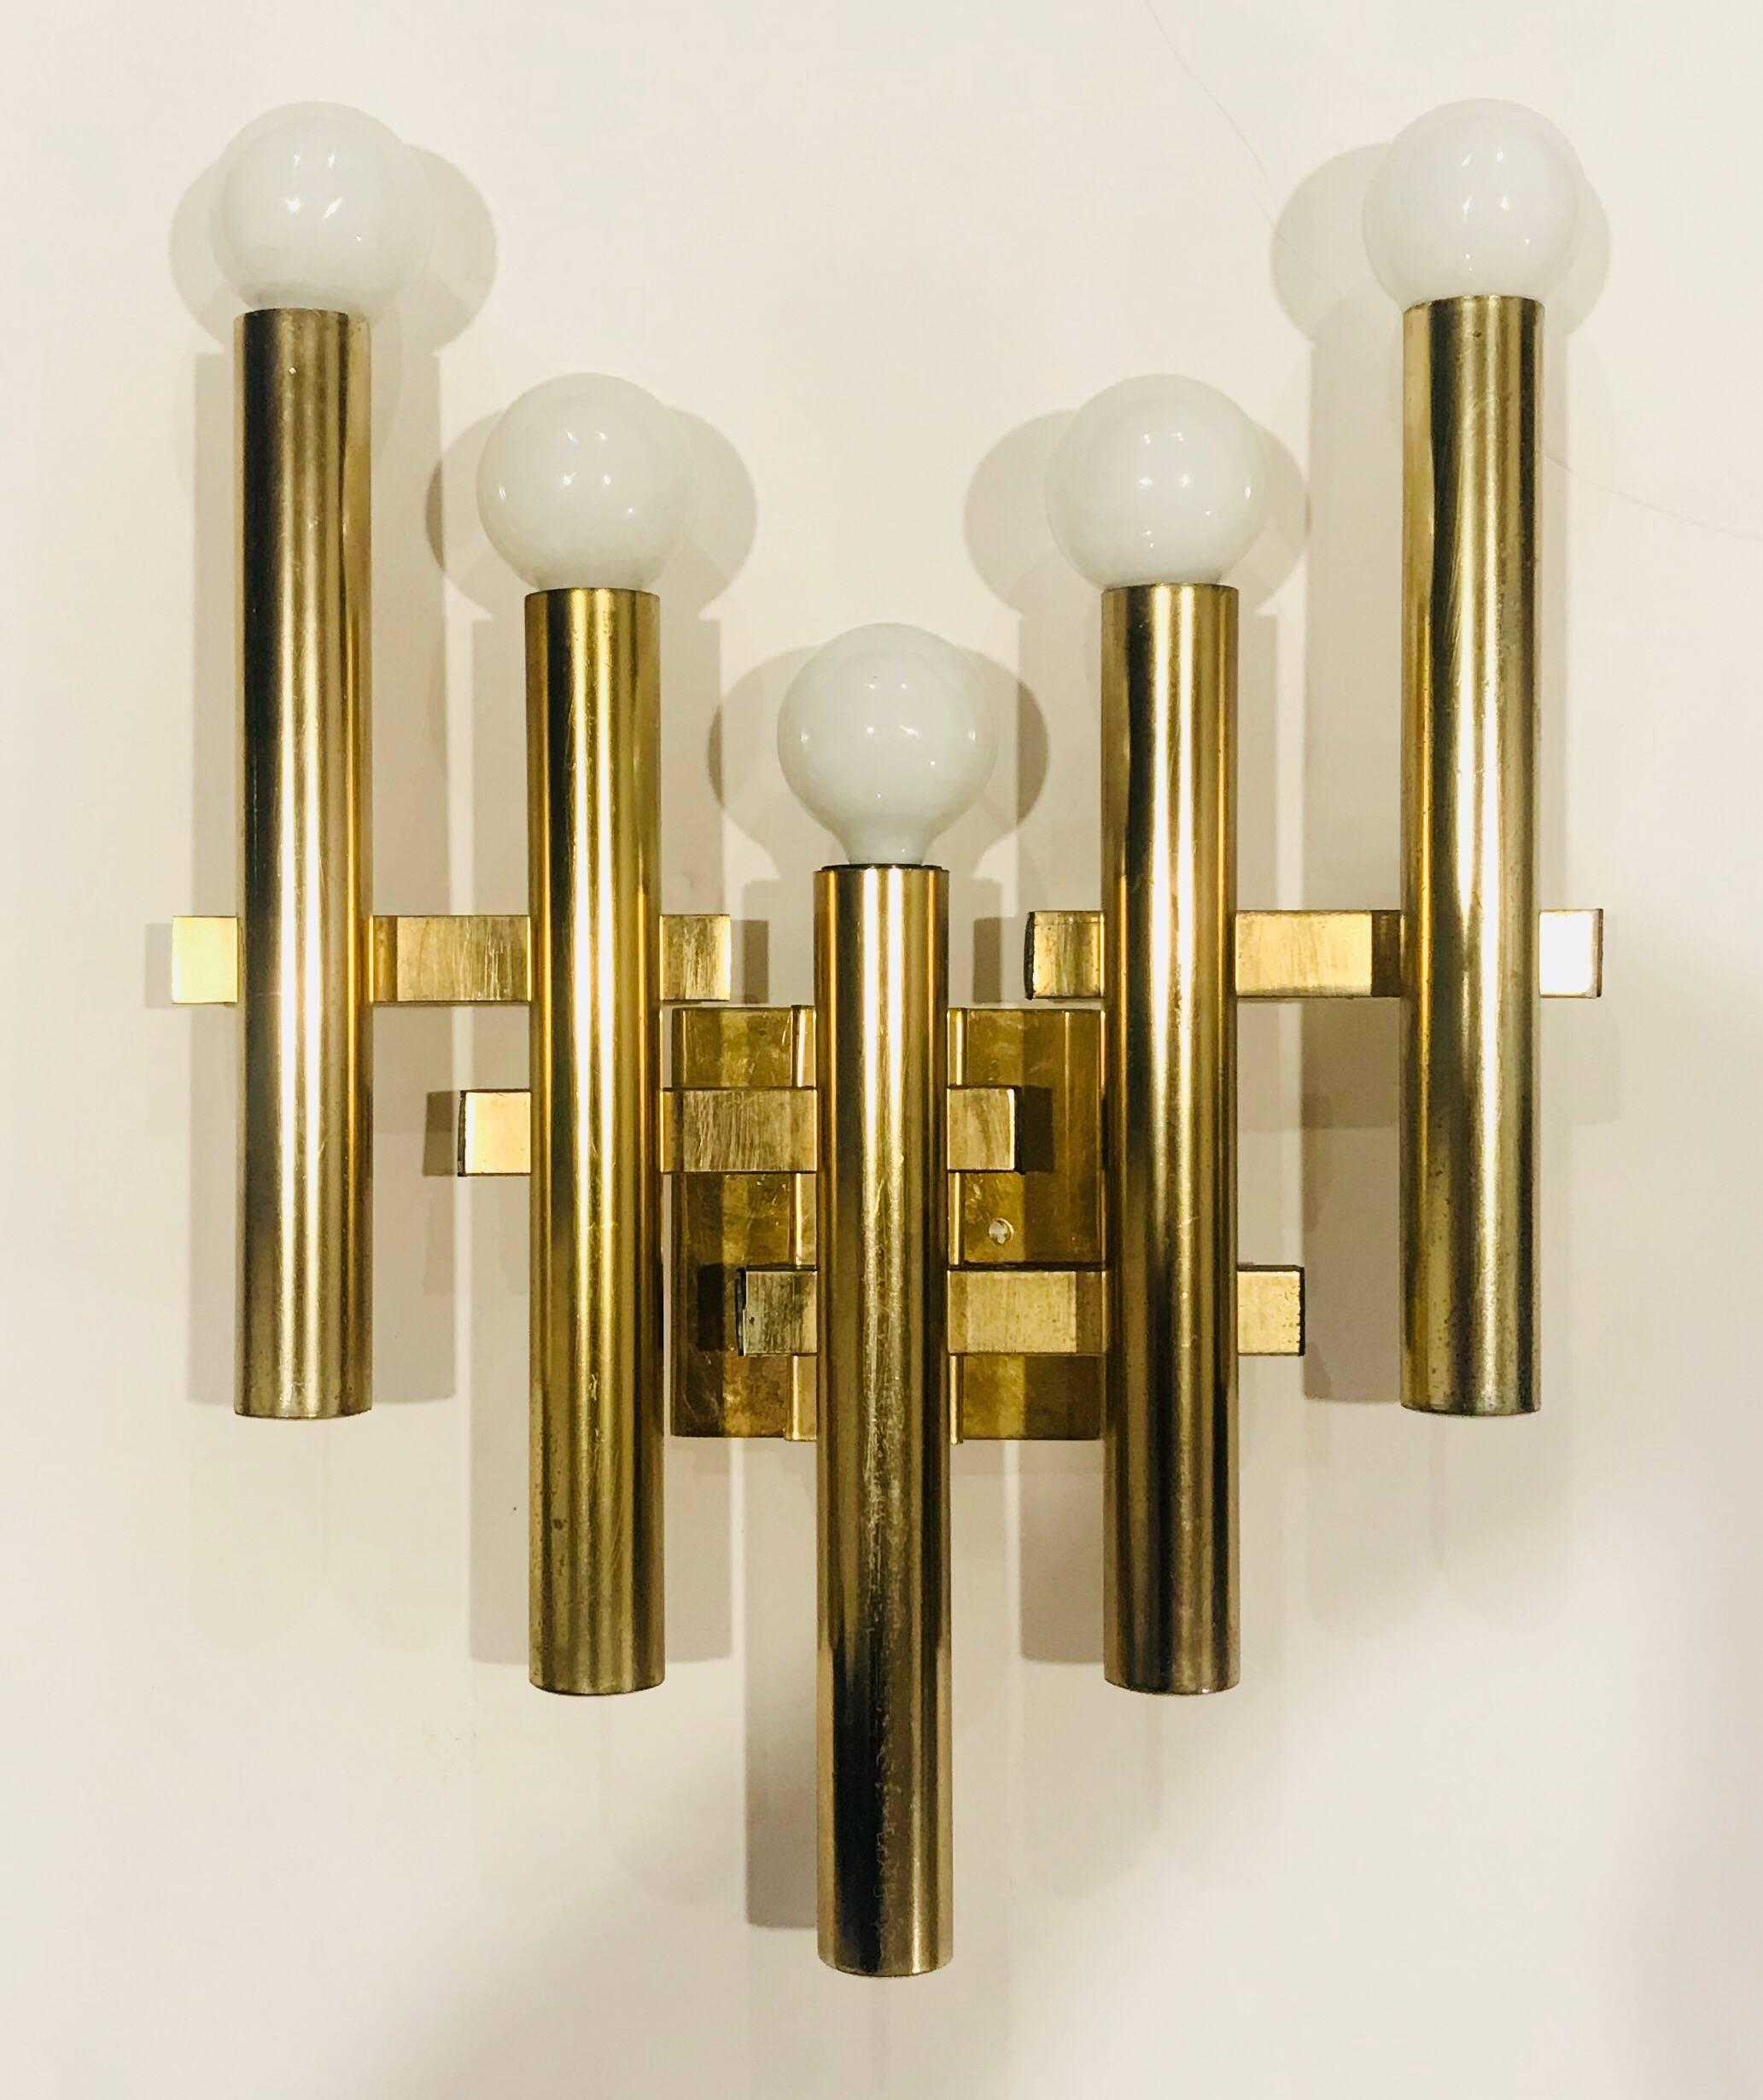 A pair of rare large aged brass scuptural wall lights by the Italian lighting maker, Sciolari. Five E12 candelabra 60 watt sockets each. Newly rewired with matching backplates.